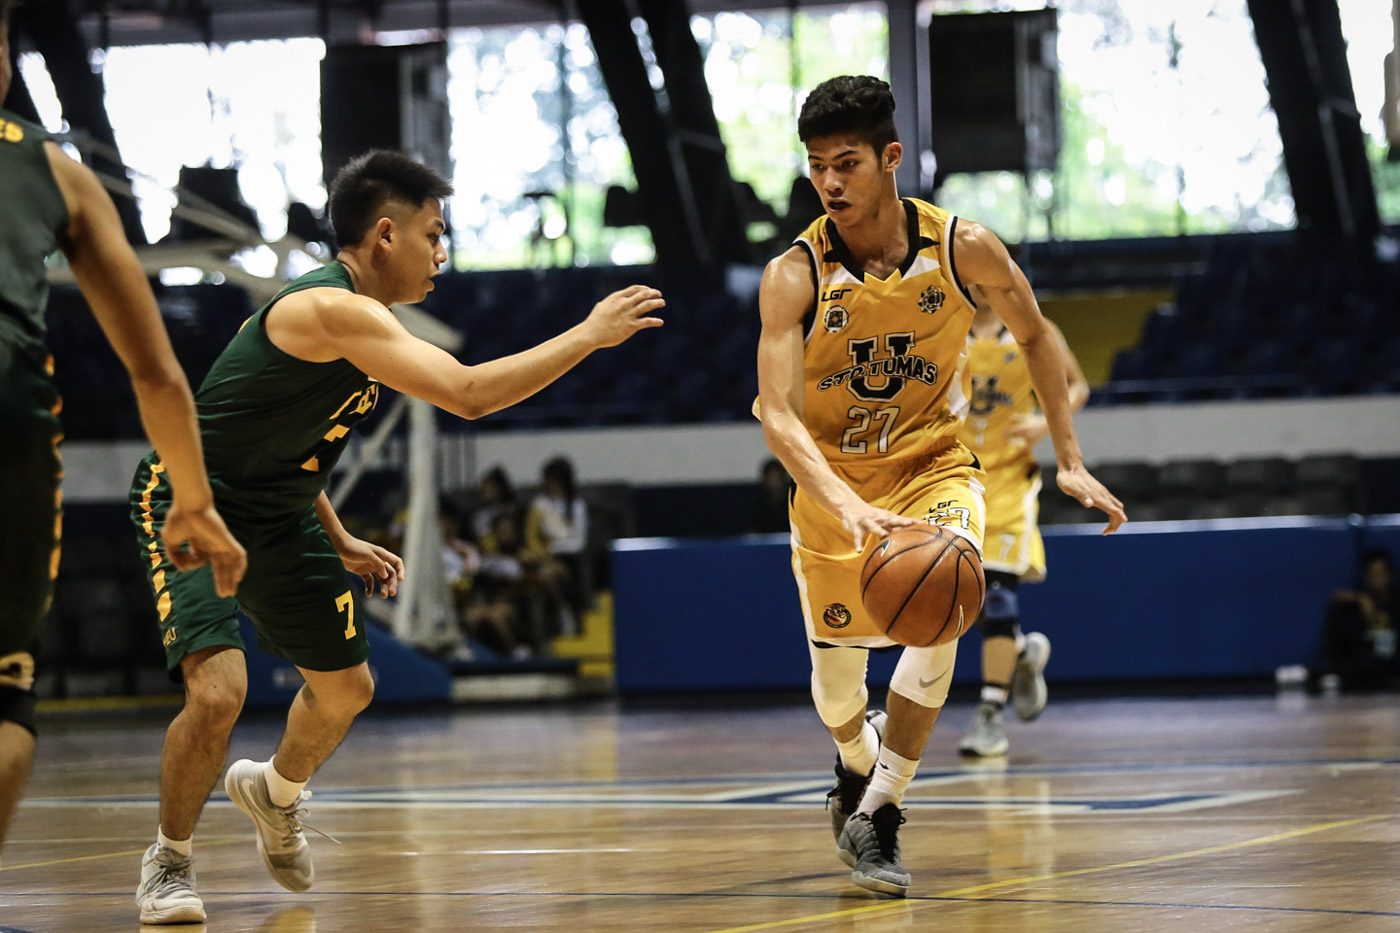 Cansino backs up new MVP status, leads UST to UAAP Jrs Final 4